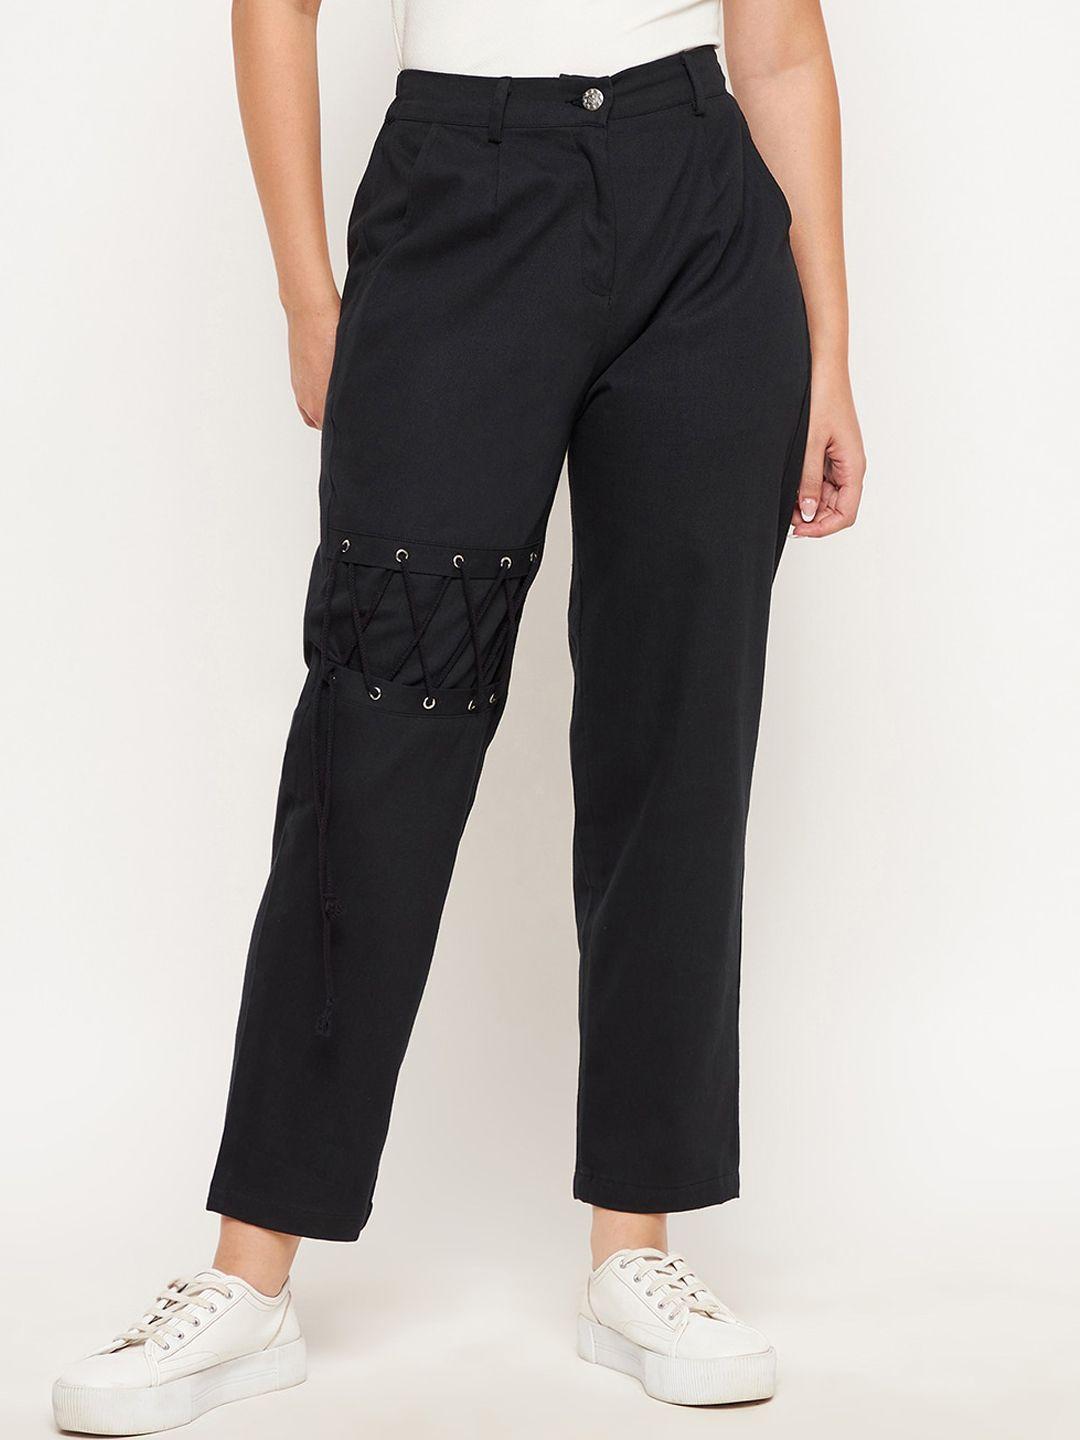 winered-women-black-high-rise-easy-wash-cargos-trousers